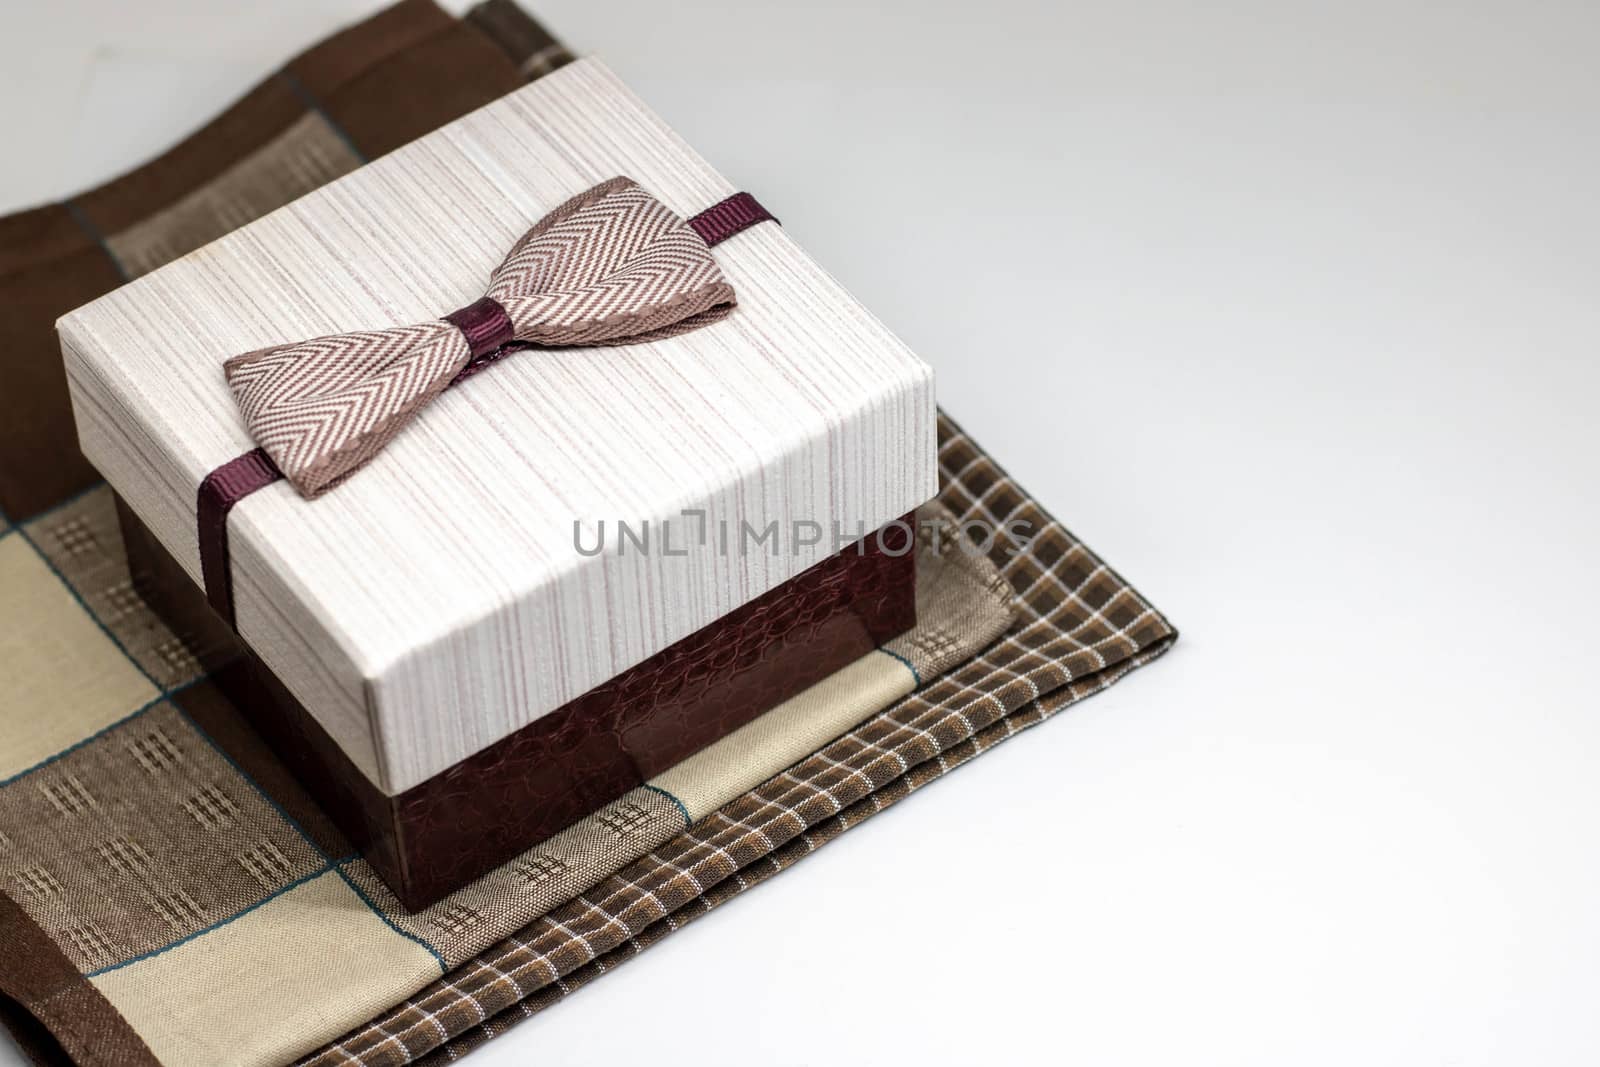 box with filling material inside. Empty natural box with decorative straw for happy gifts isolate on white background